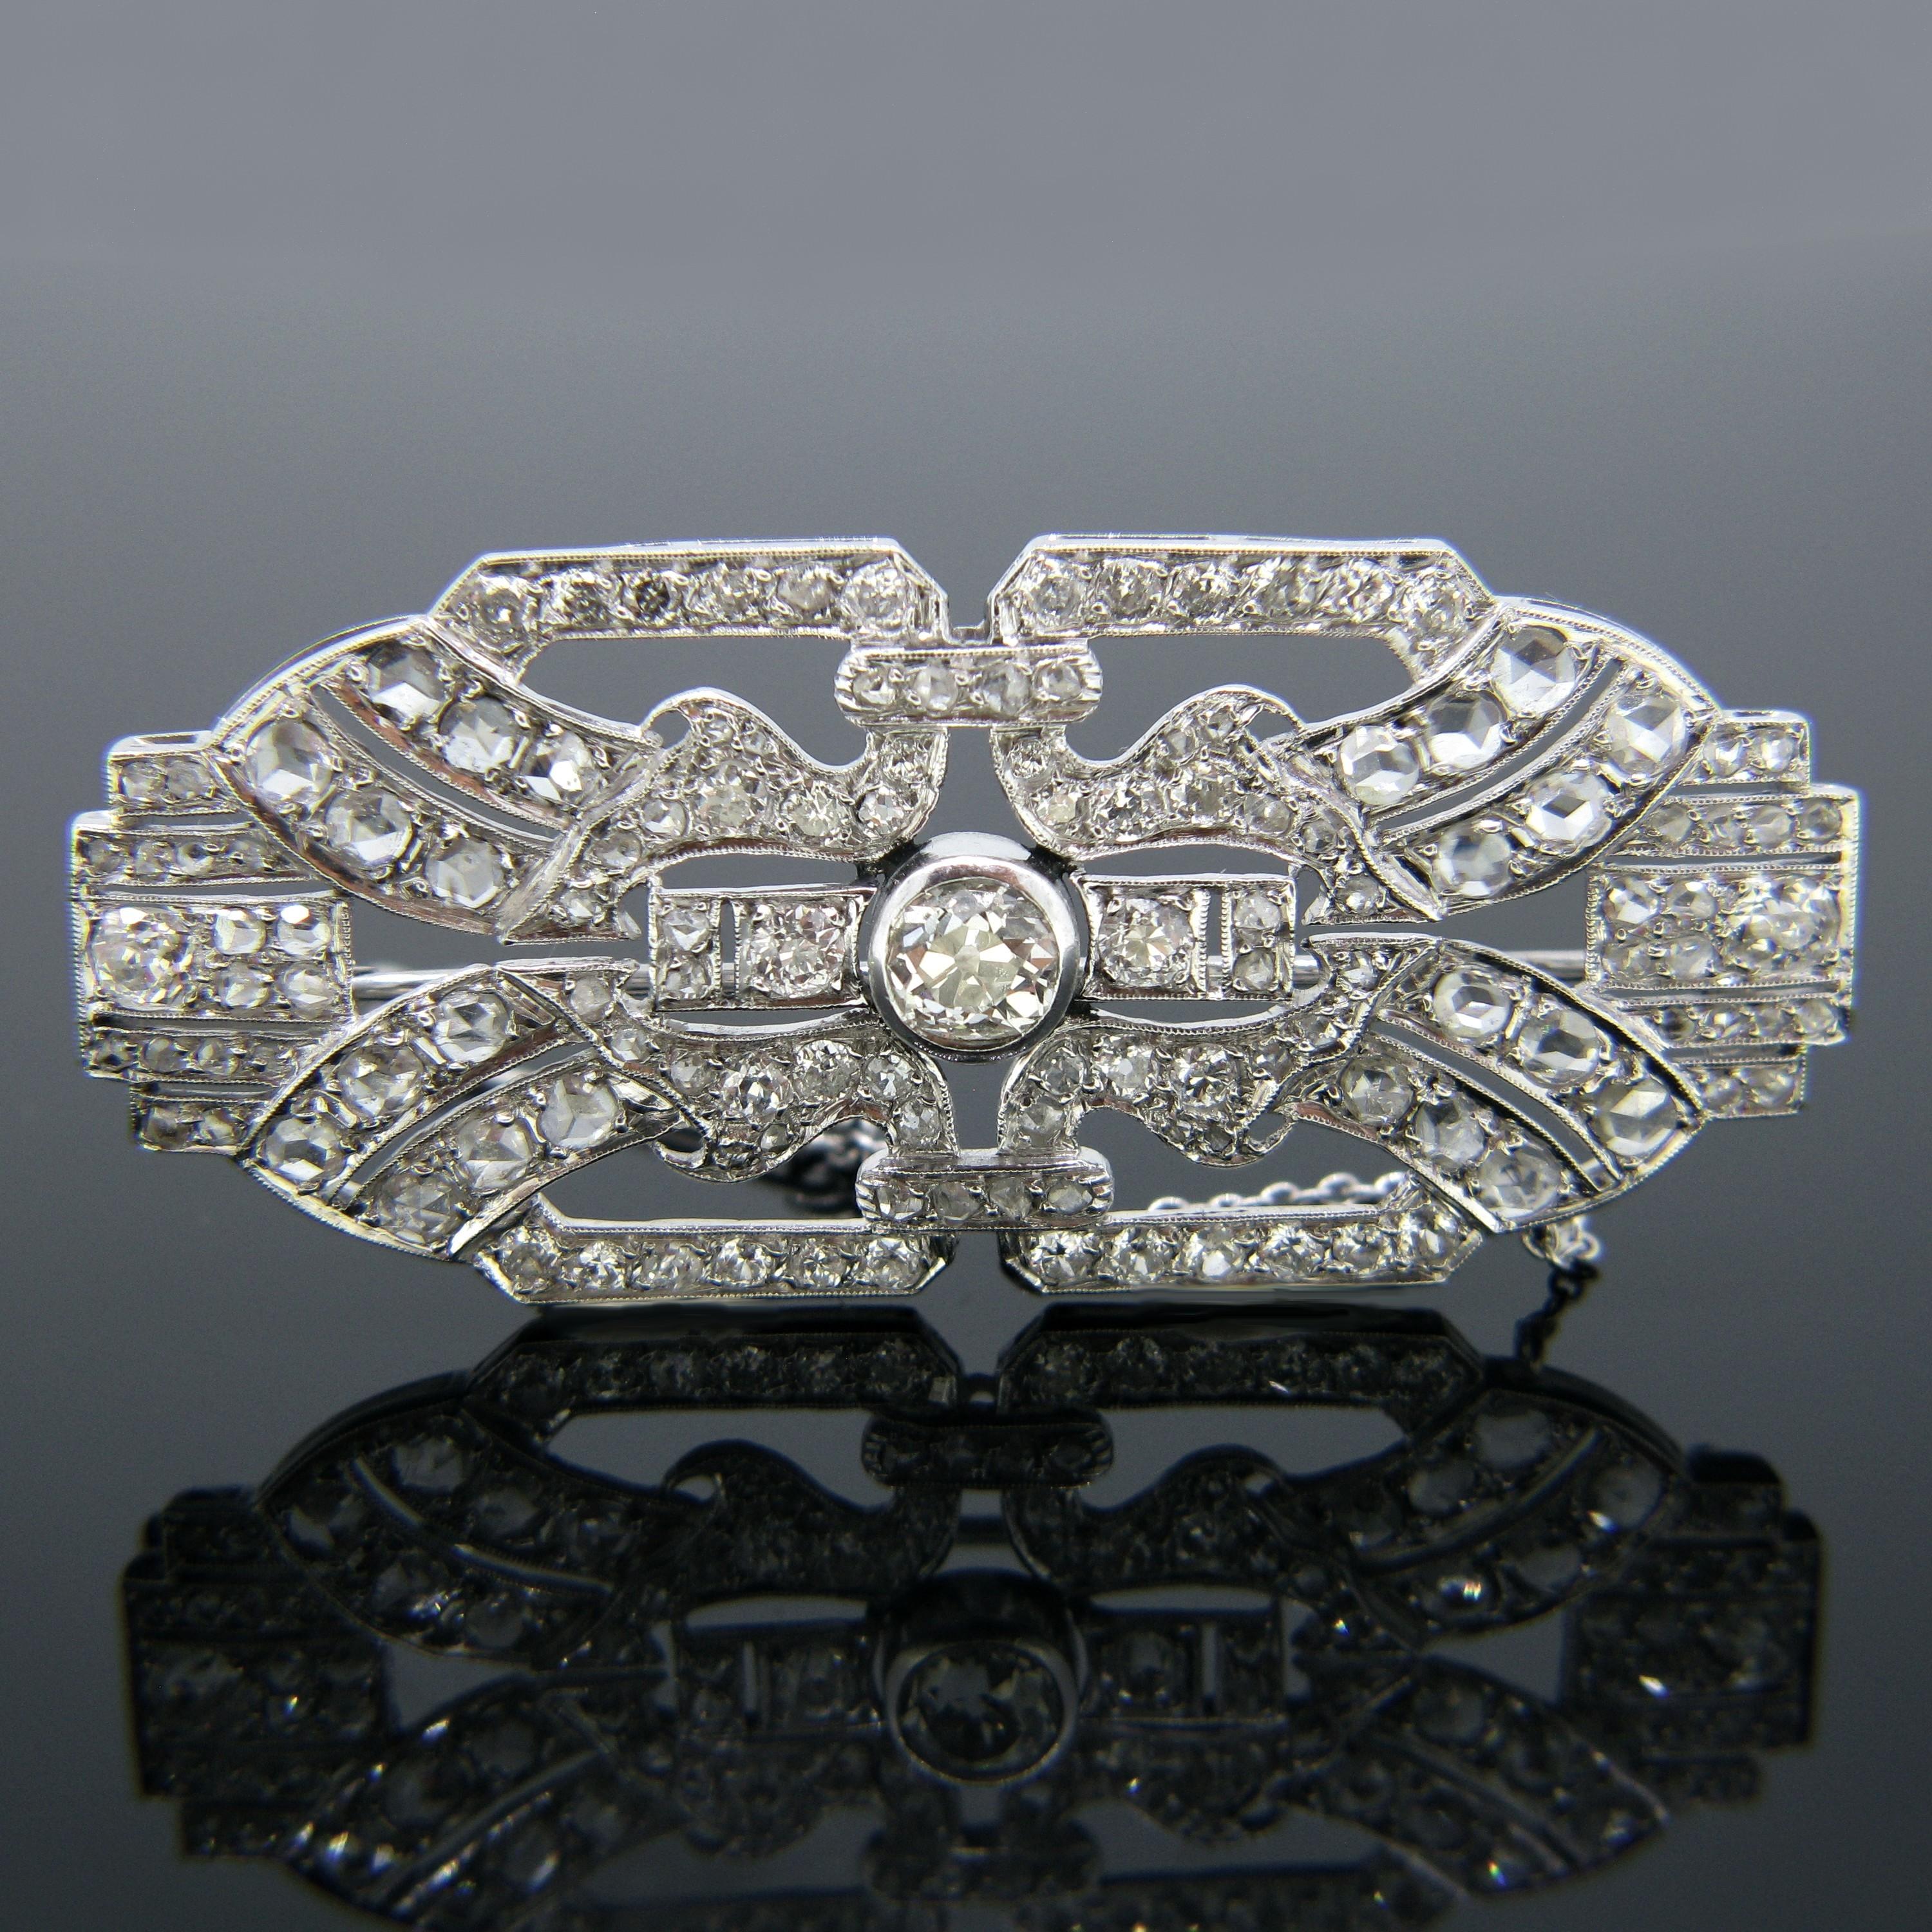 This brooch is from the Art Deco era and is made in platinum. It features 133 diamonds – 88 Rose Cut, 44 Old Mine arranged in a typical Art Deco design. In the centre it is set with an old mine cut diamond weighing approximately 0.80ct. It is a